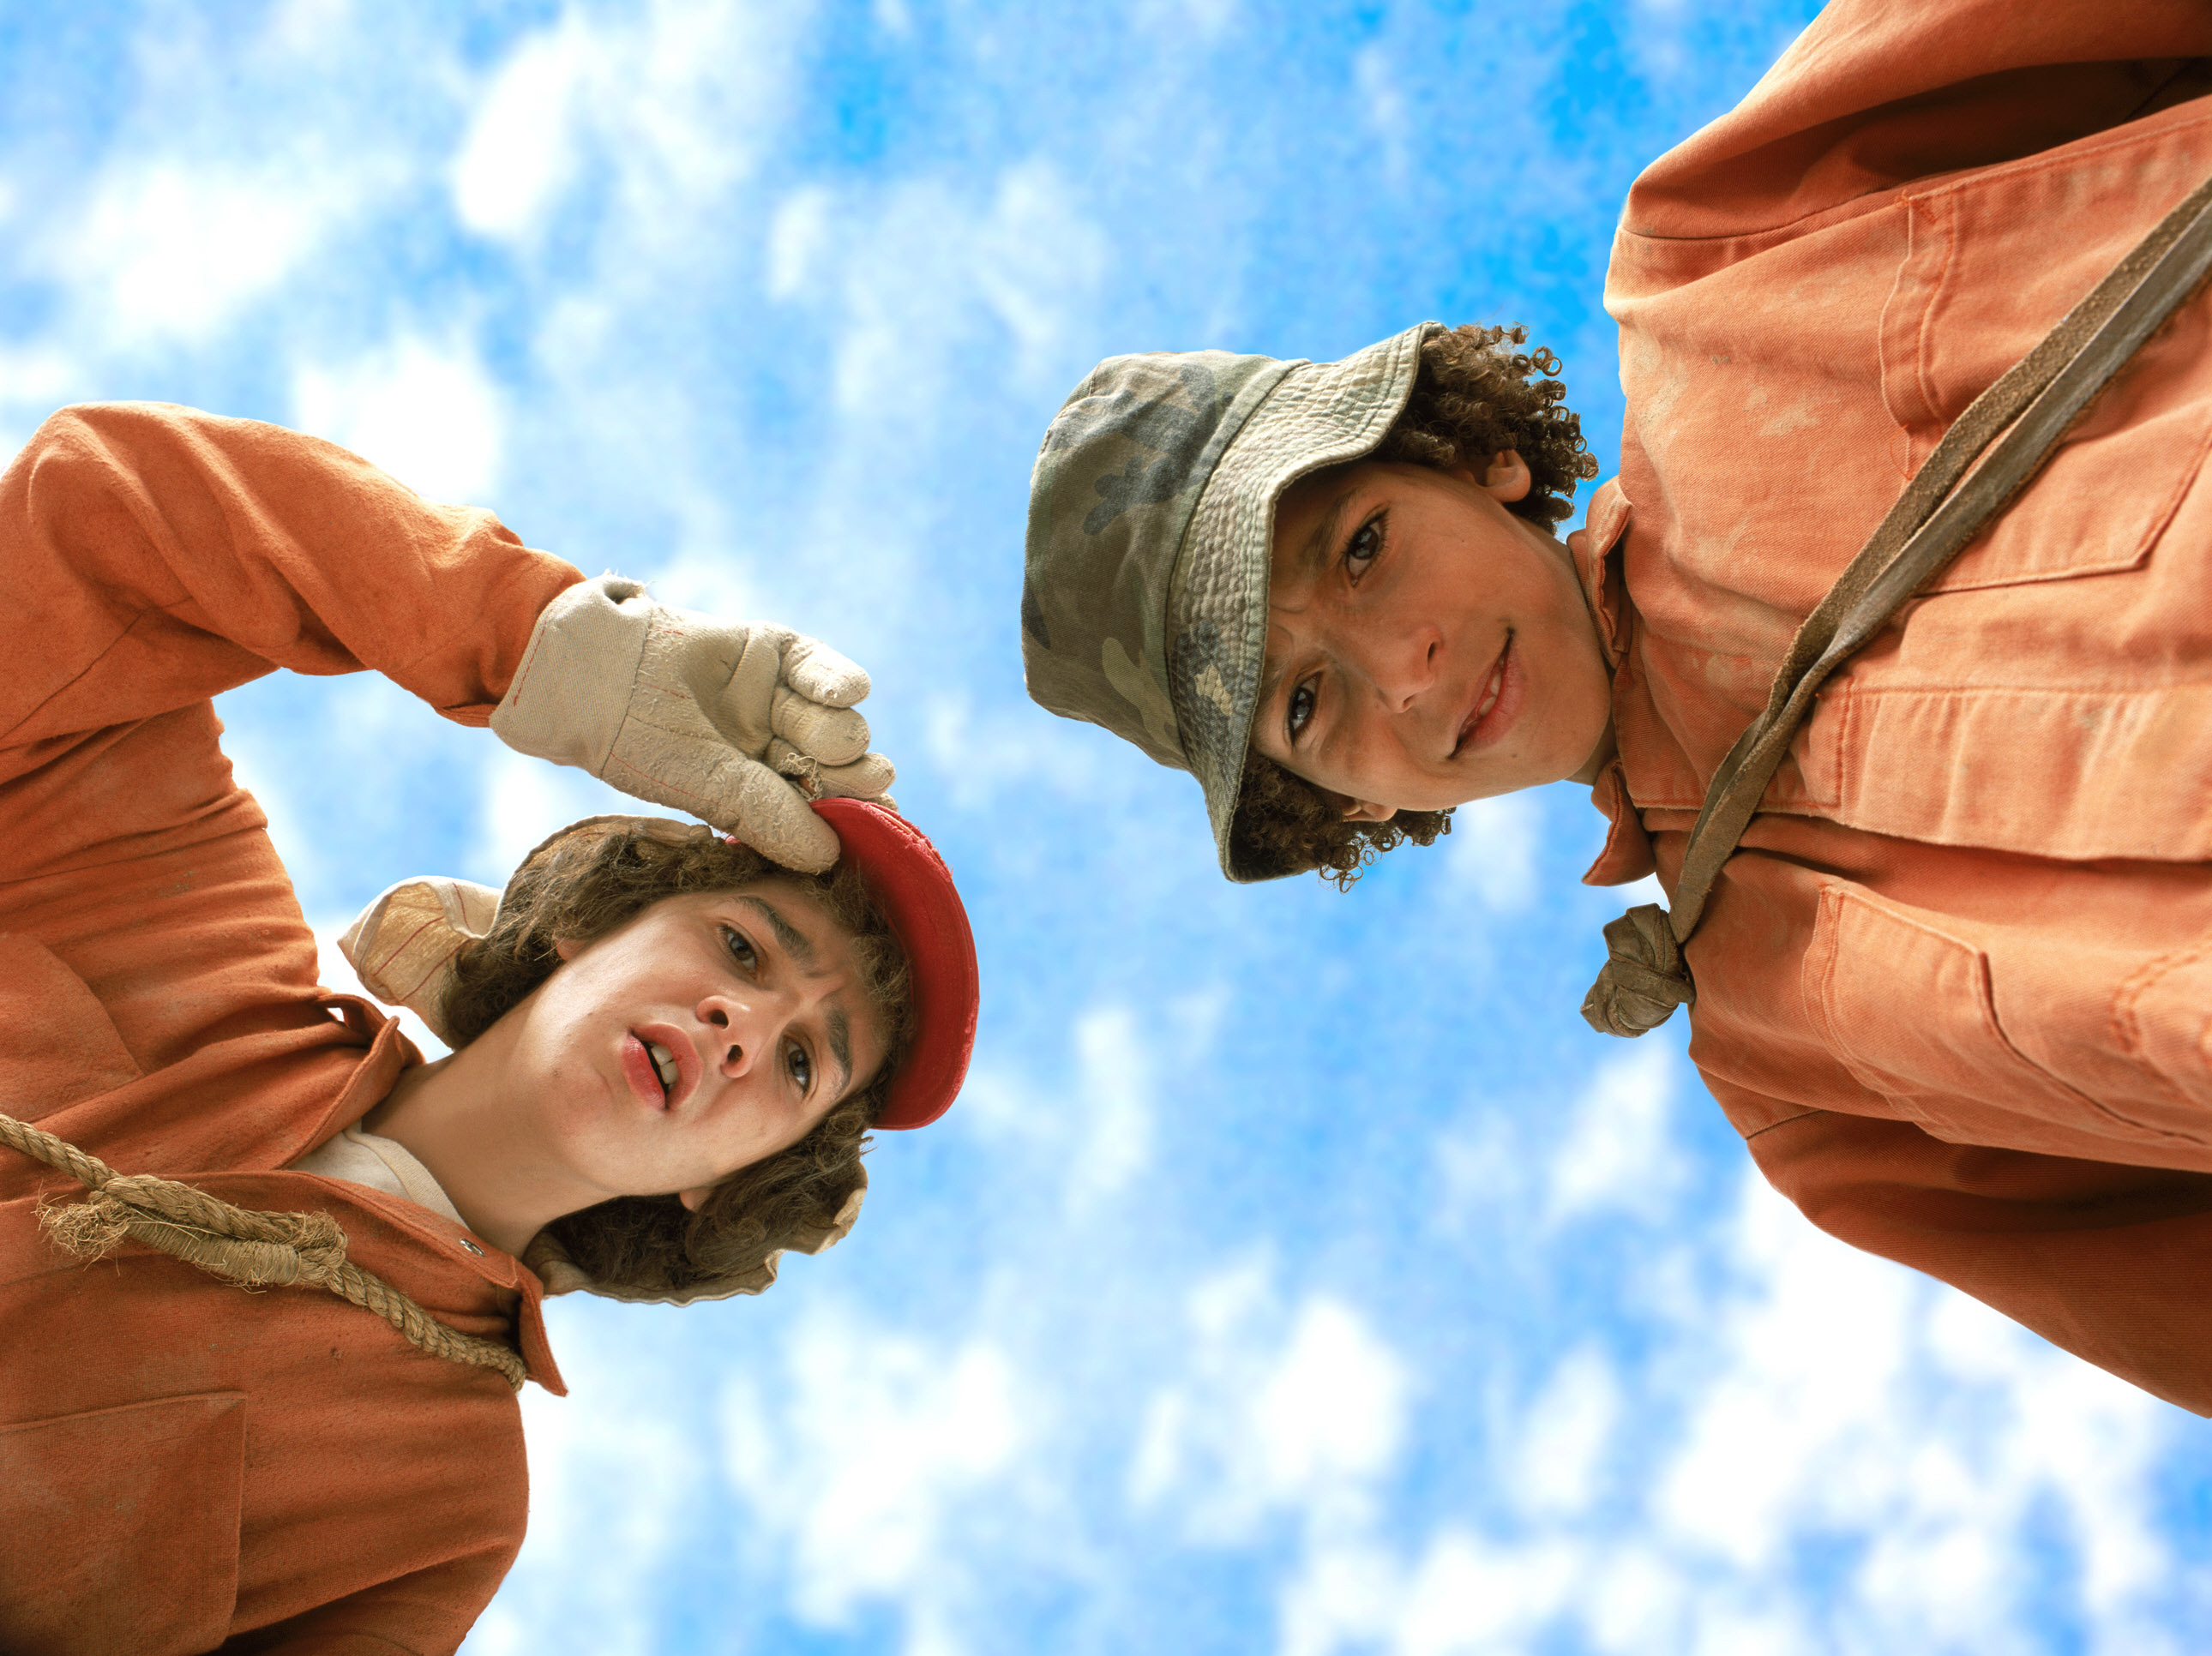 Stanley and Hector in prison jumpsuits looking down from above